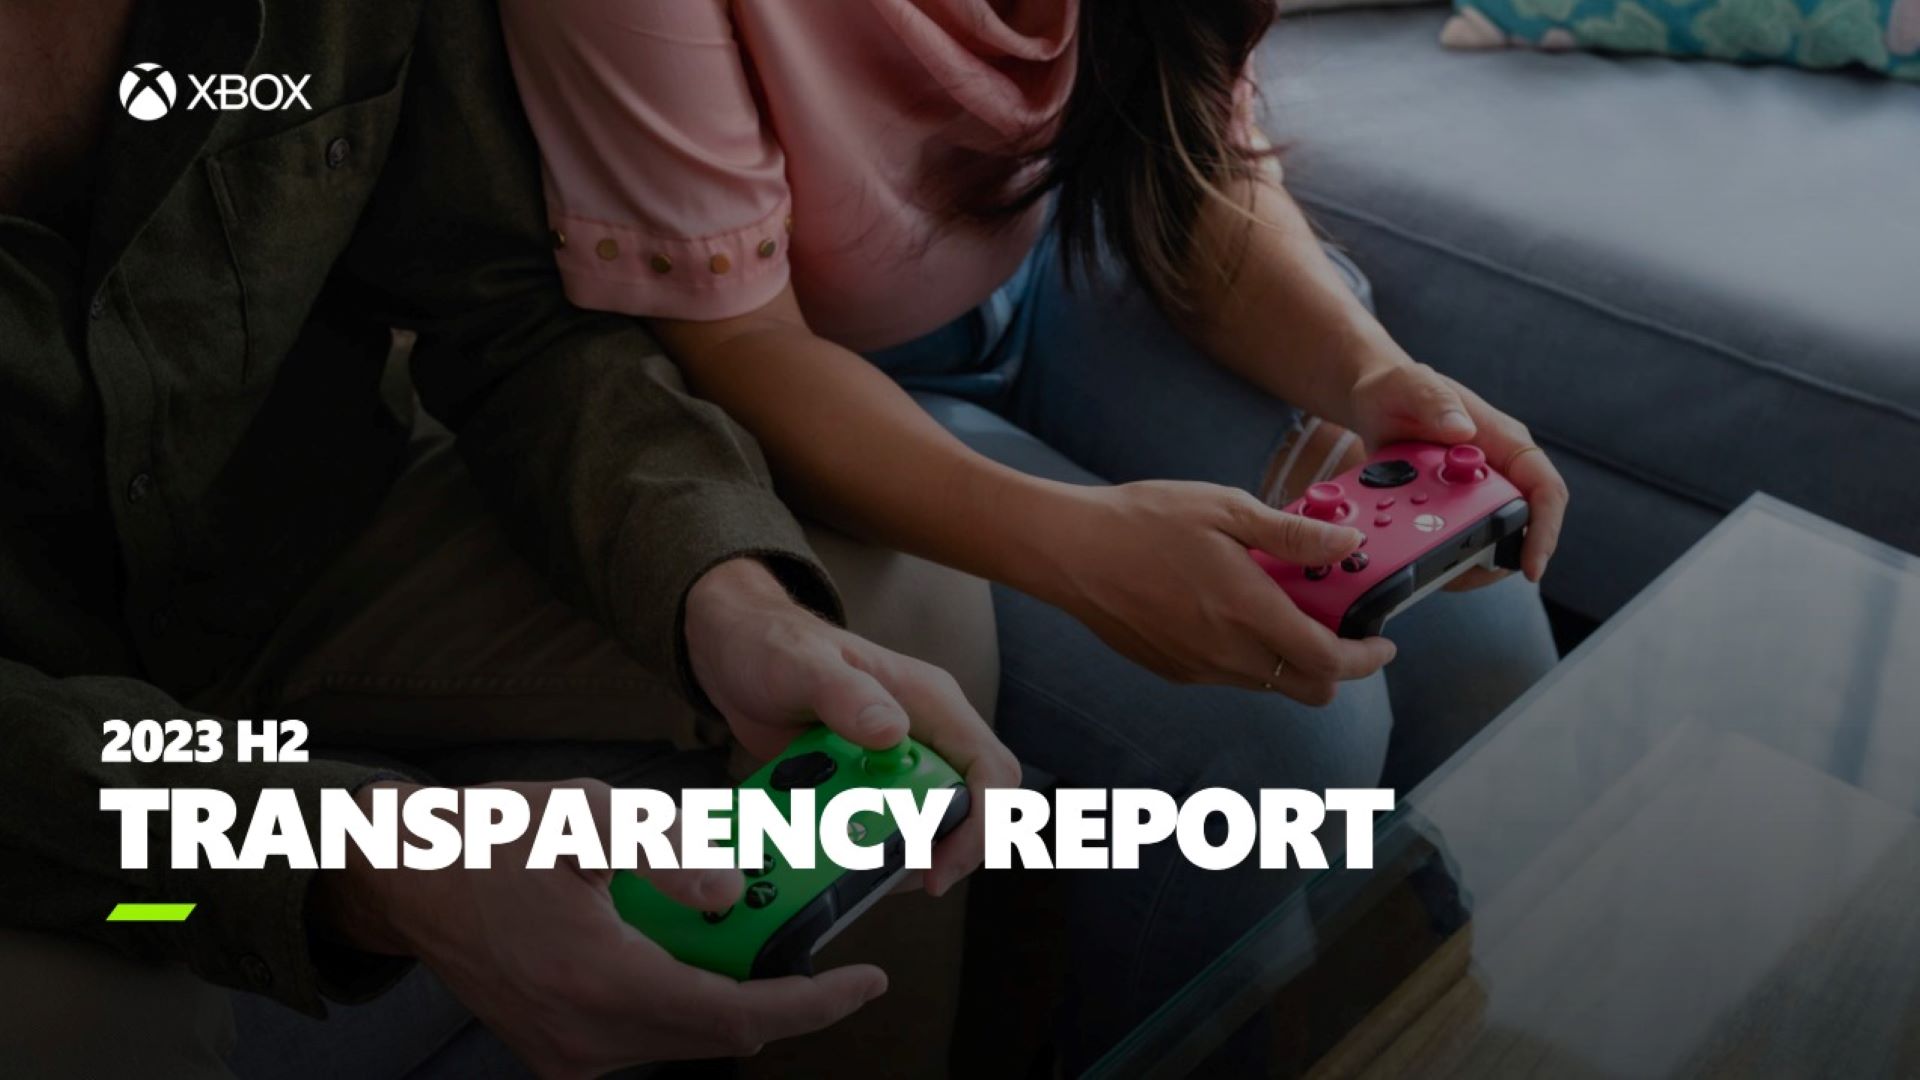 Xbox Transparency Report